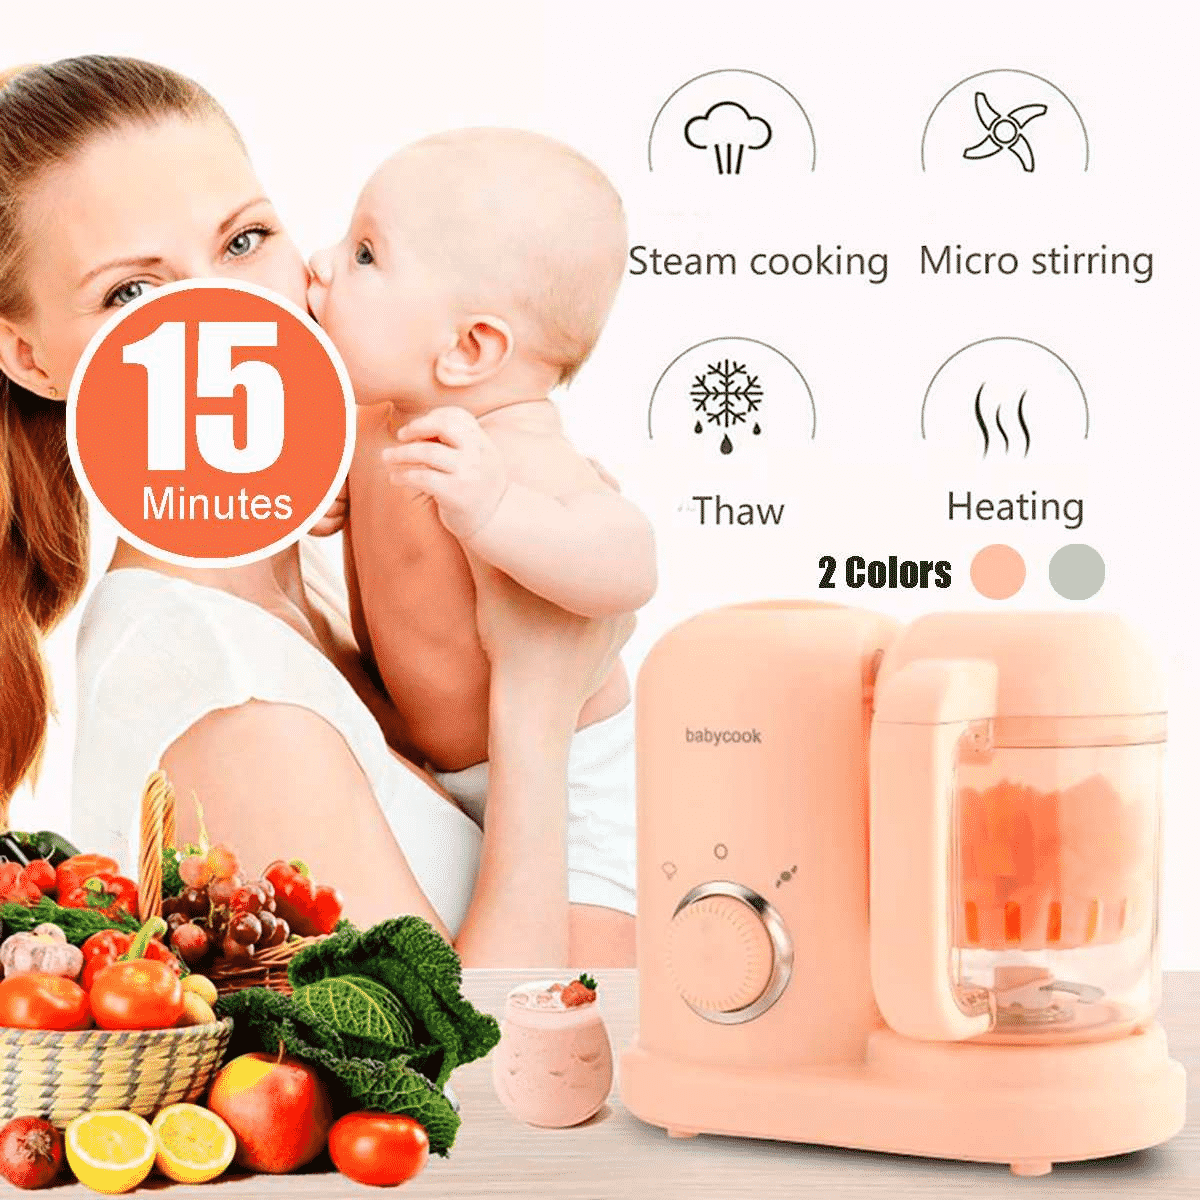 Top 10 Smart Baby Products